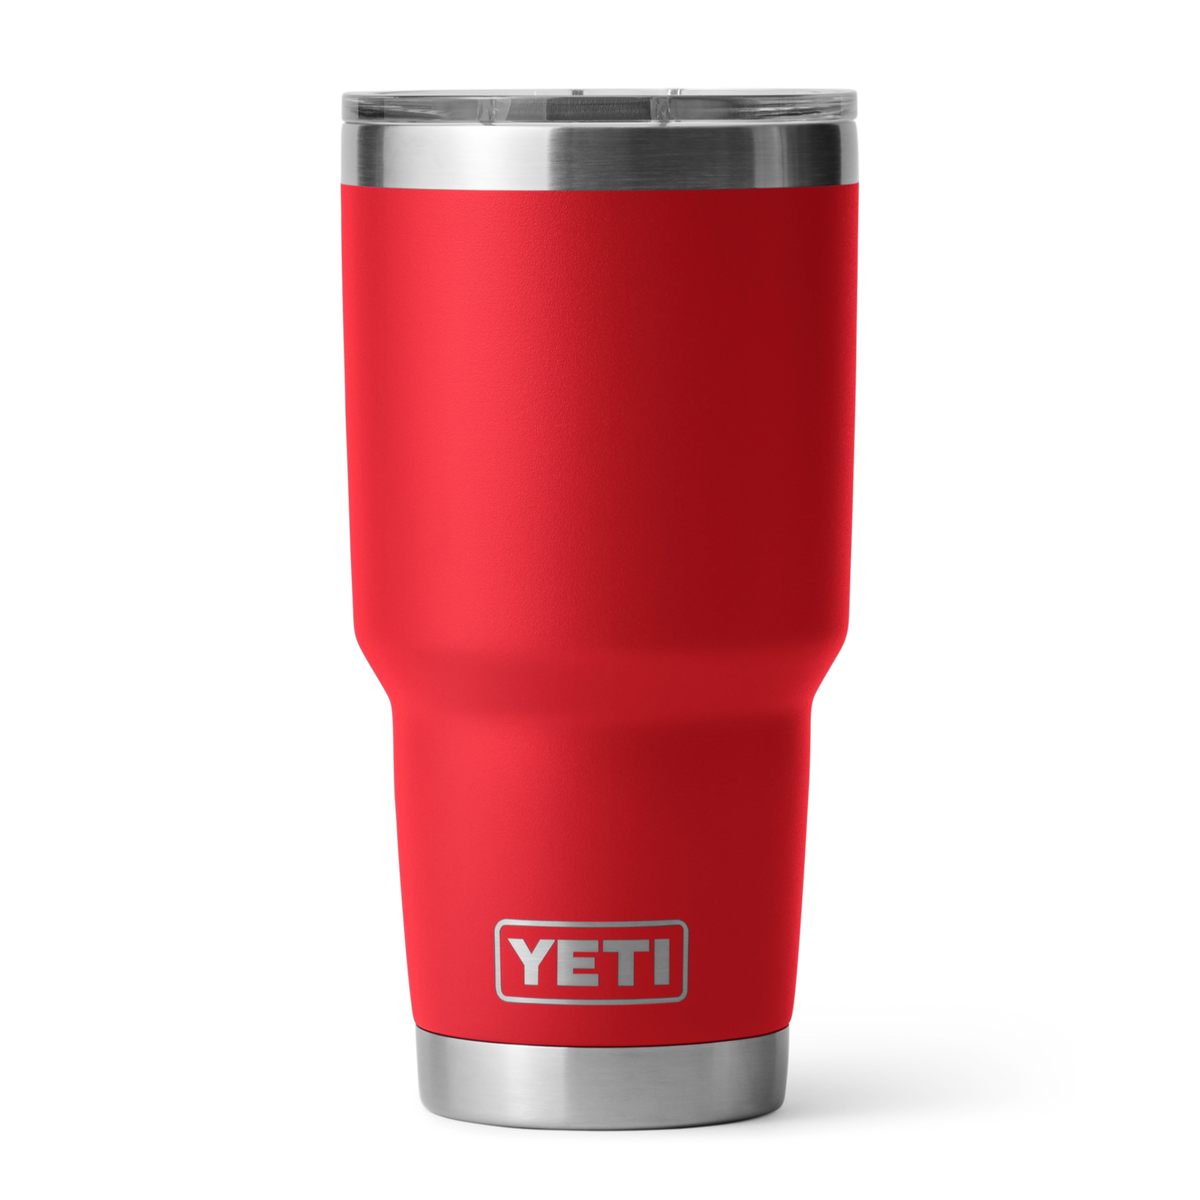 Yeti Rambler 30 Oz. Black Stainless Steel Insulated Tumbler with MagSlider  Lid - Carr Hardware